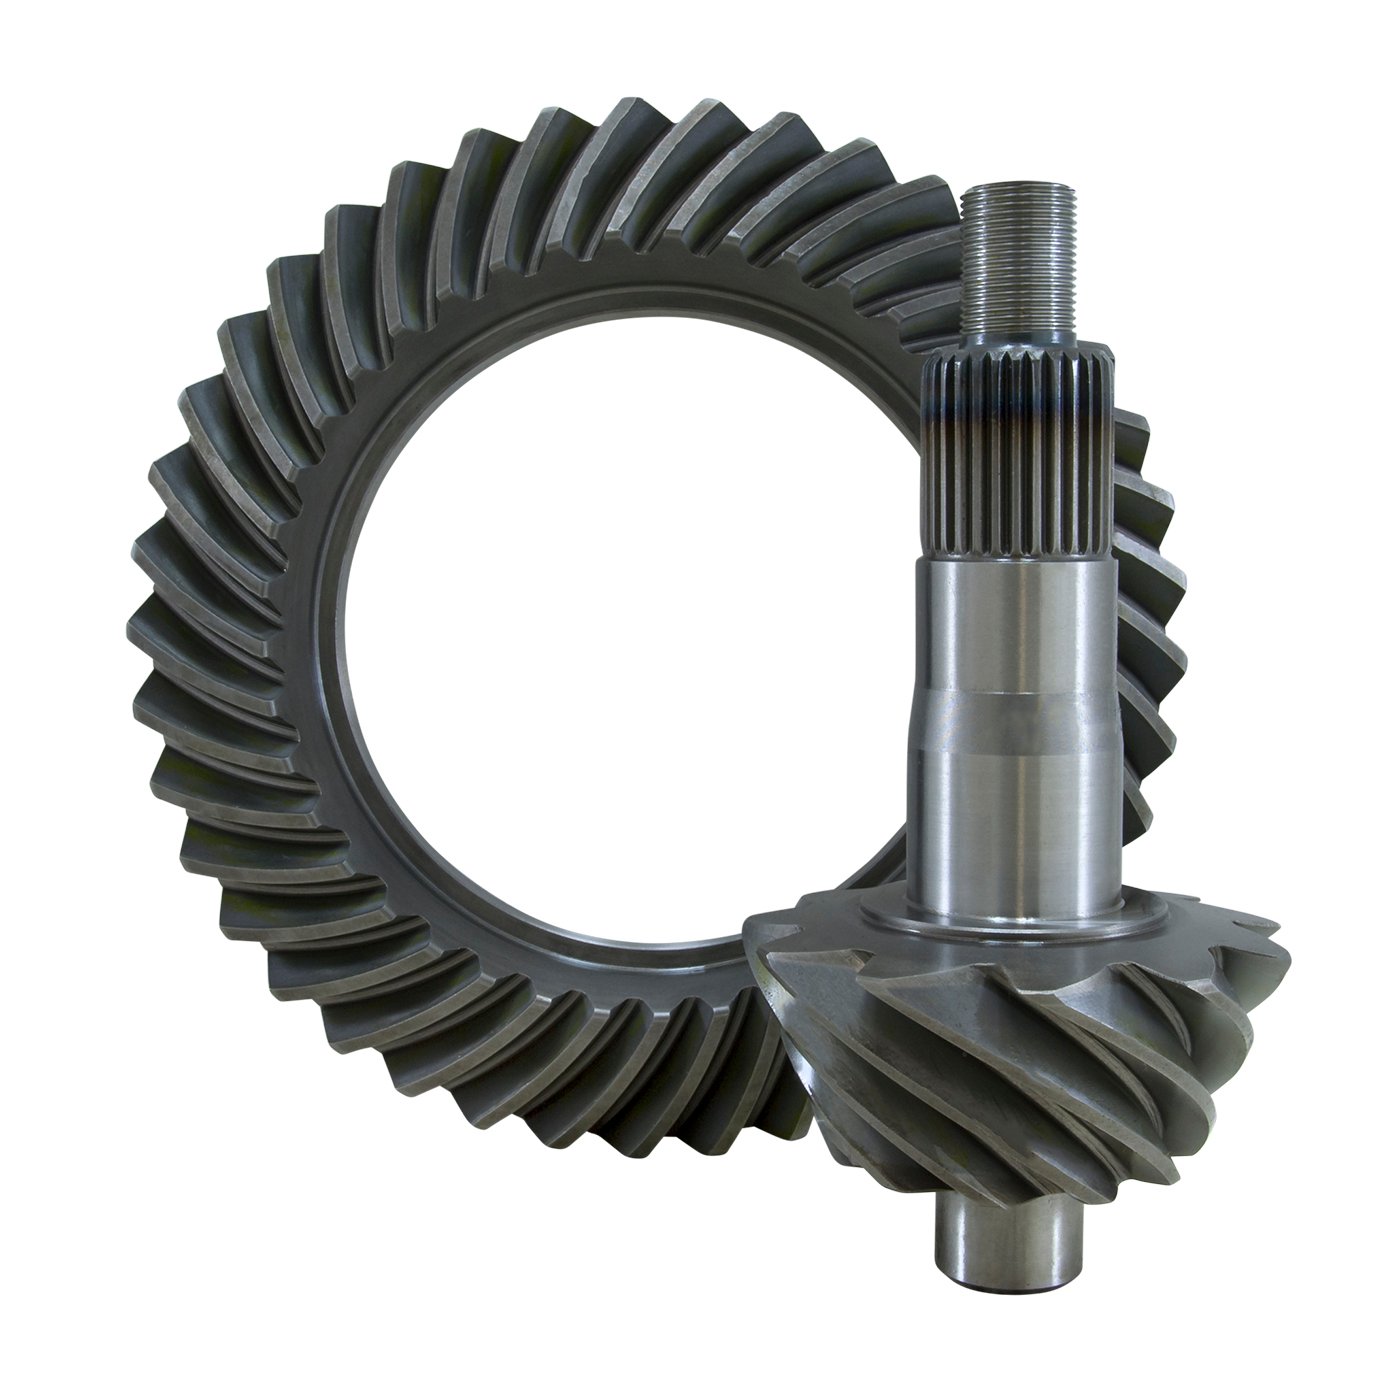 USA Standard 36185 Ring & Pinion Set, For 10.5 in. GM 14 Bolt Truck, 4.56 Ratio, Thick